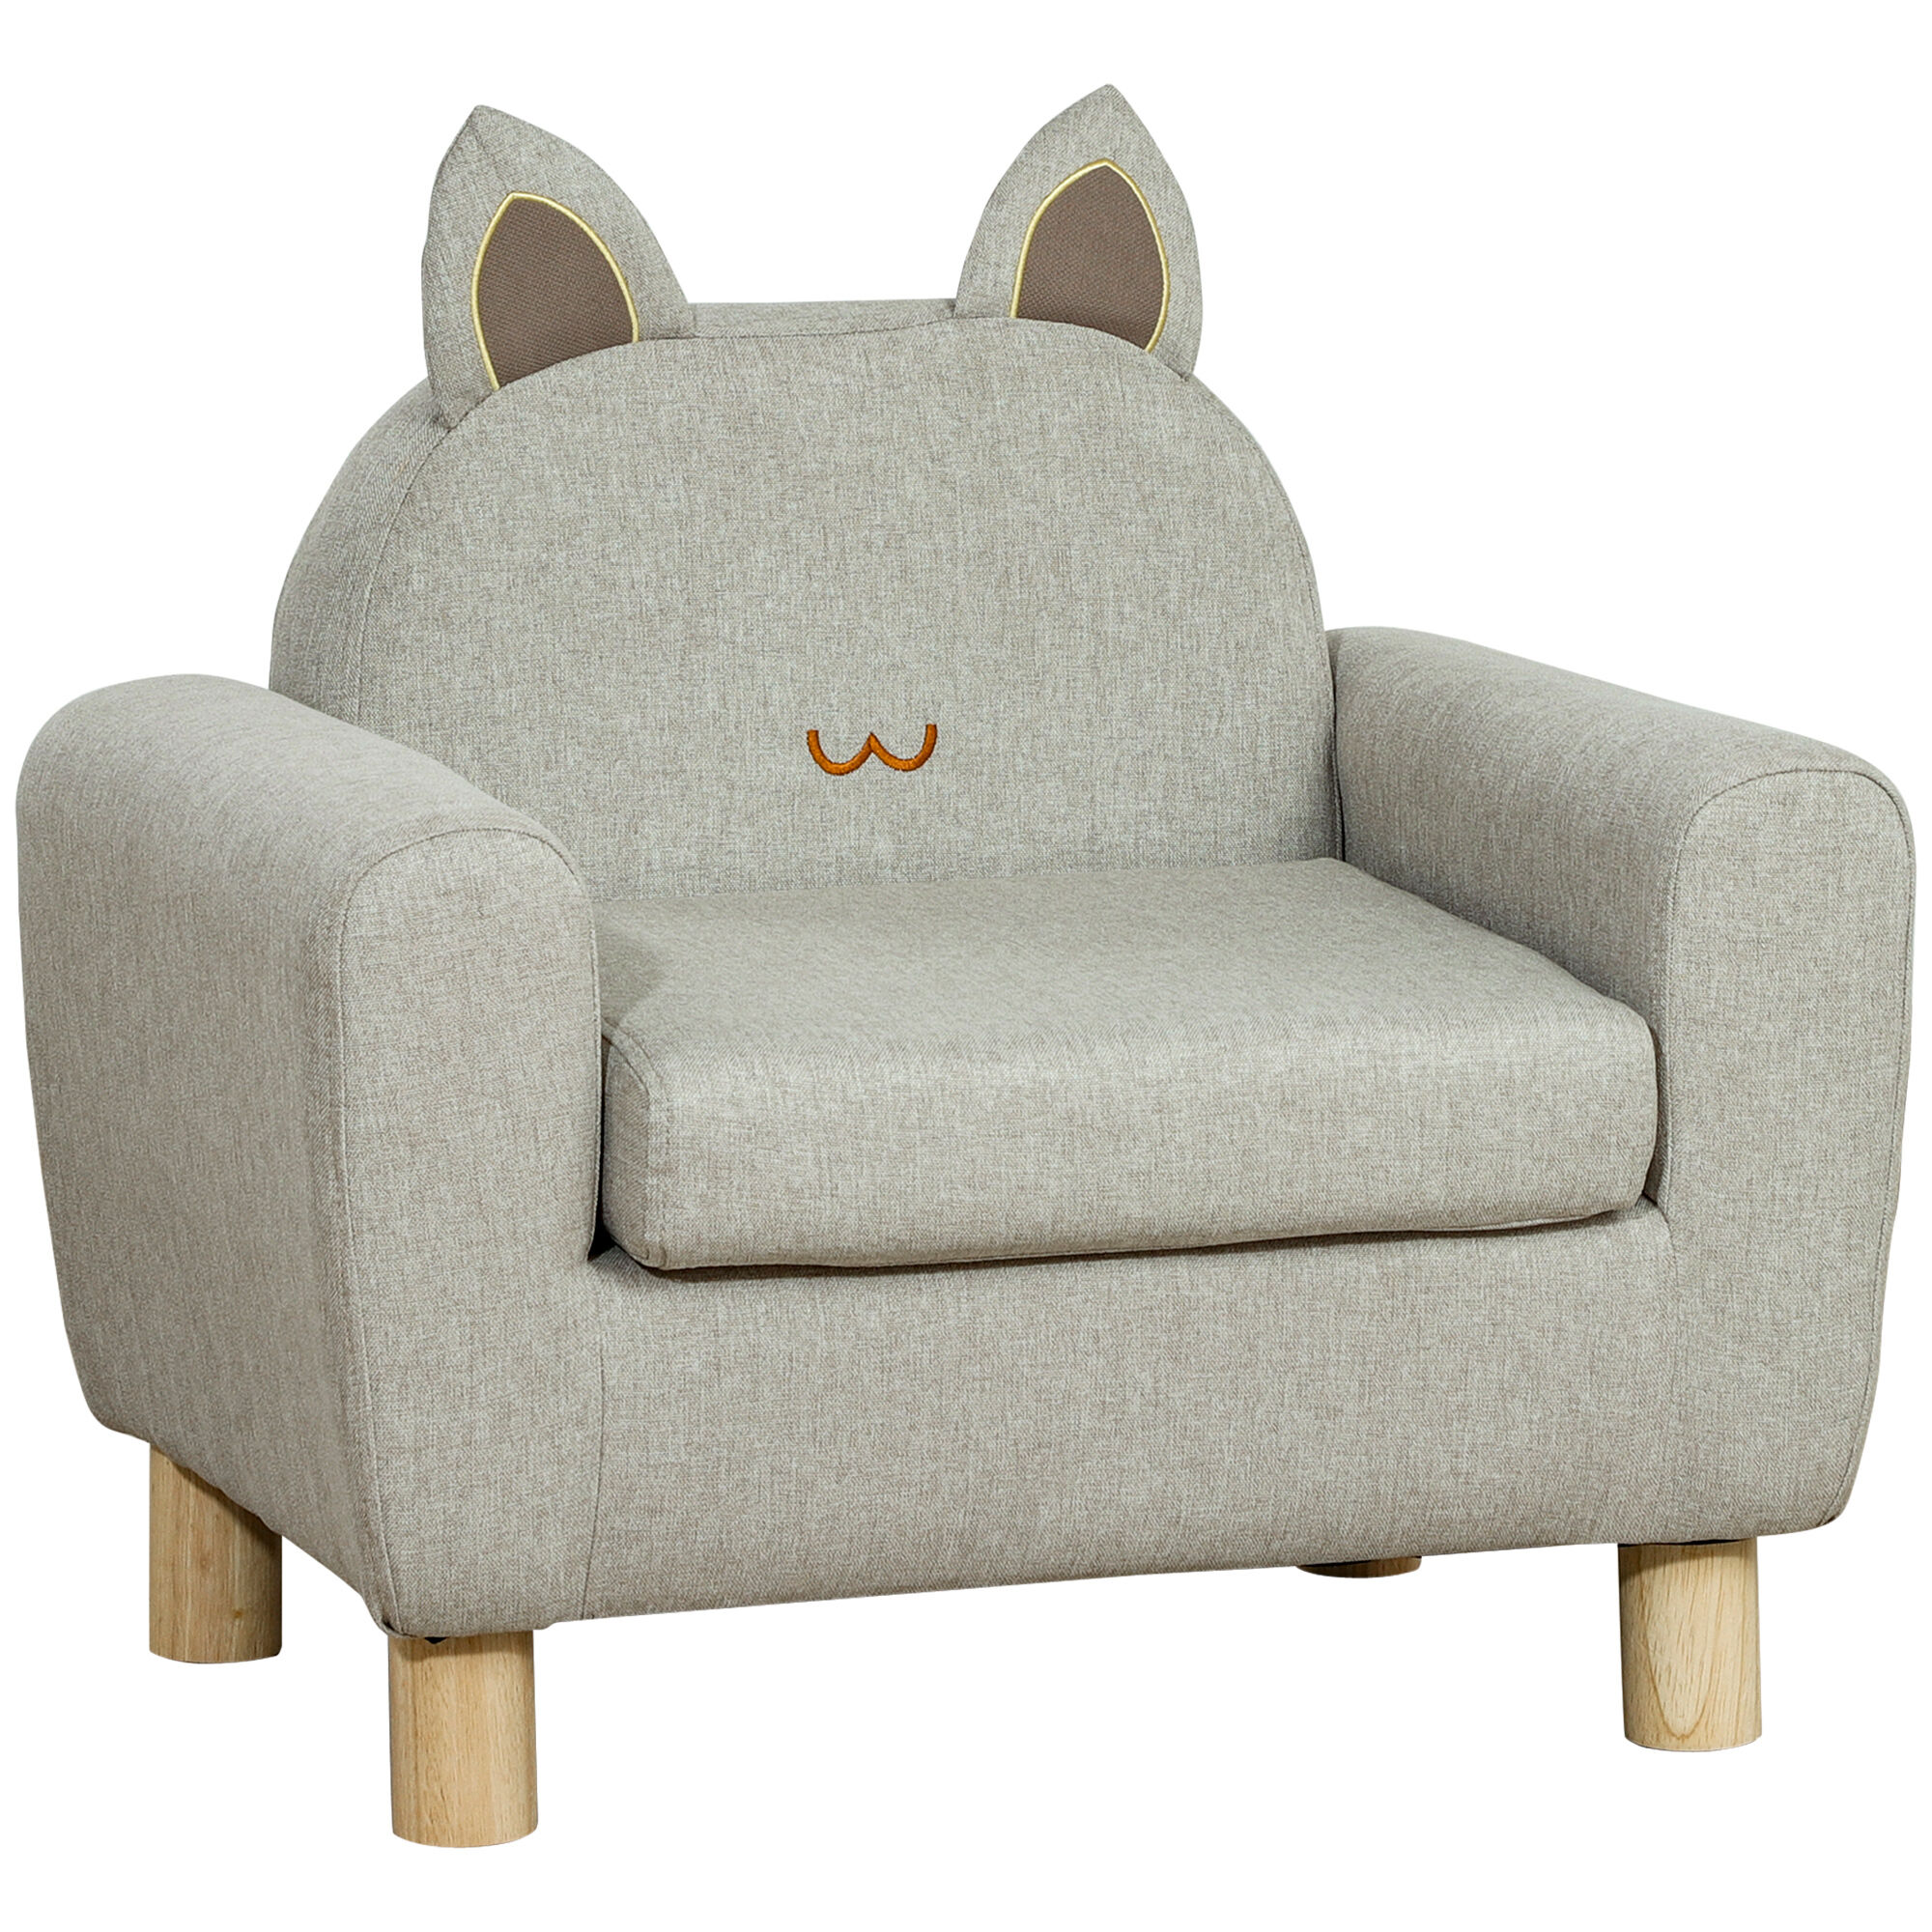 Qaba Grey Toddler Sofa Cat Ear Backrest Armchair with Wooden Legs Preschool and Bedroom Seating for Kids   Aosom.com